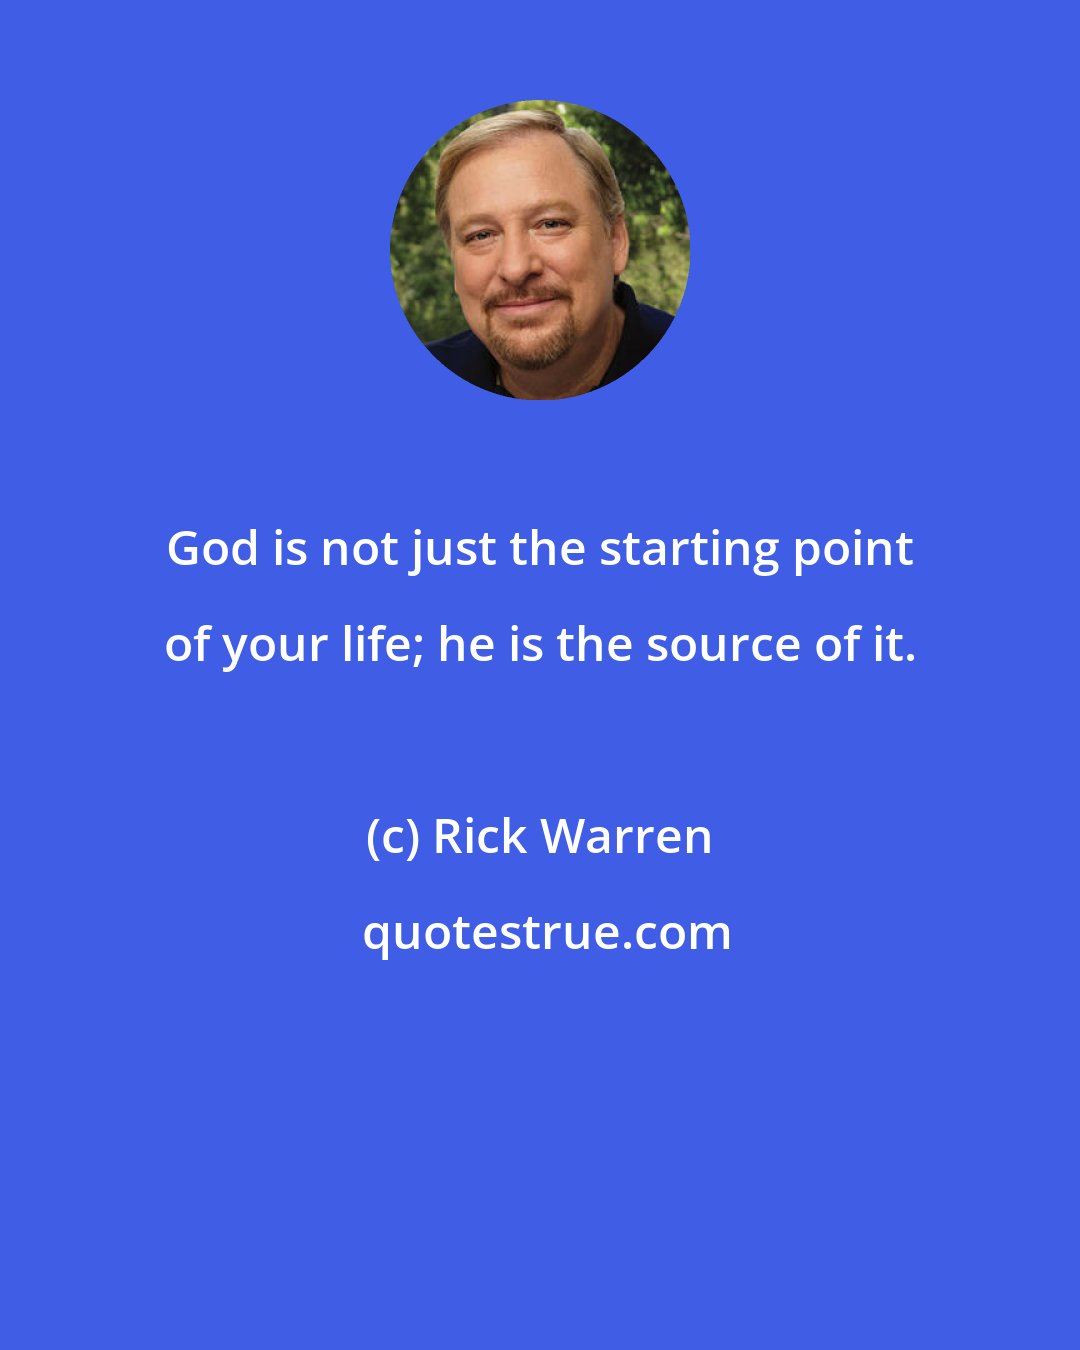 Rick Warren: God is not just the starting point of your life; he is the source of it.